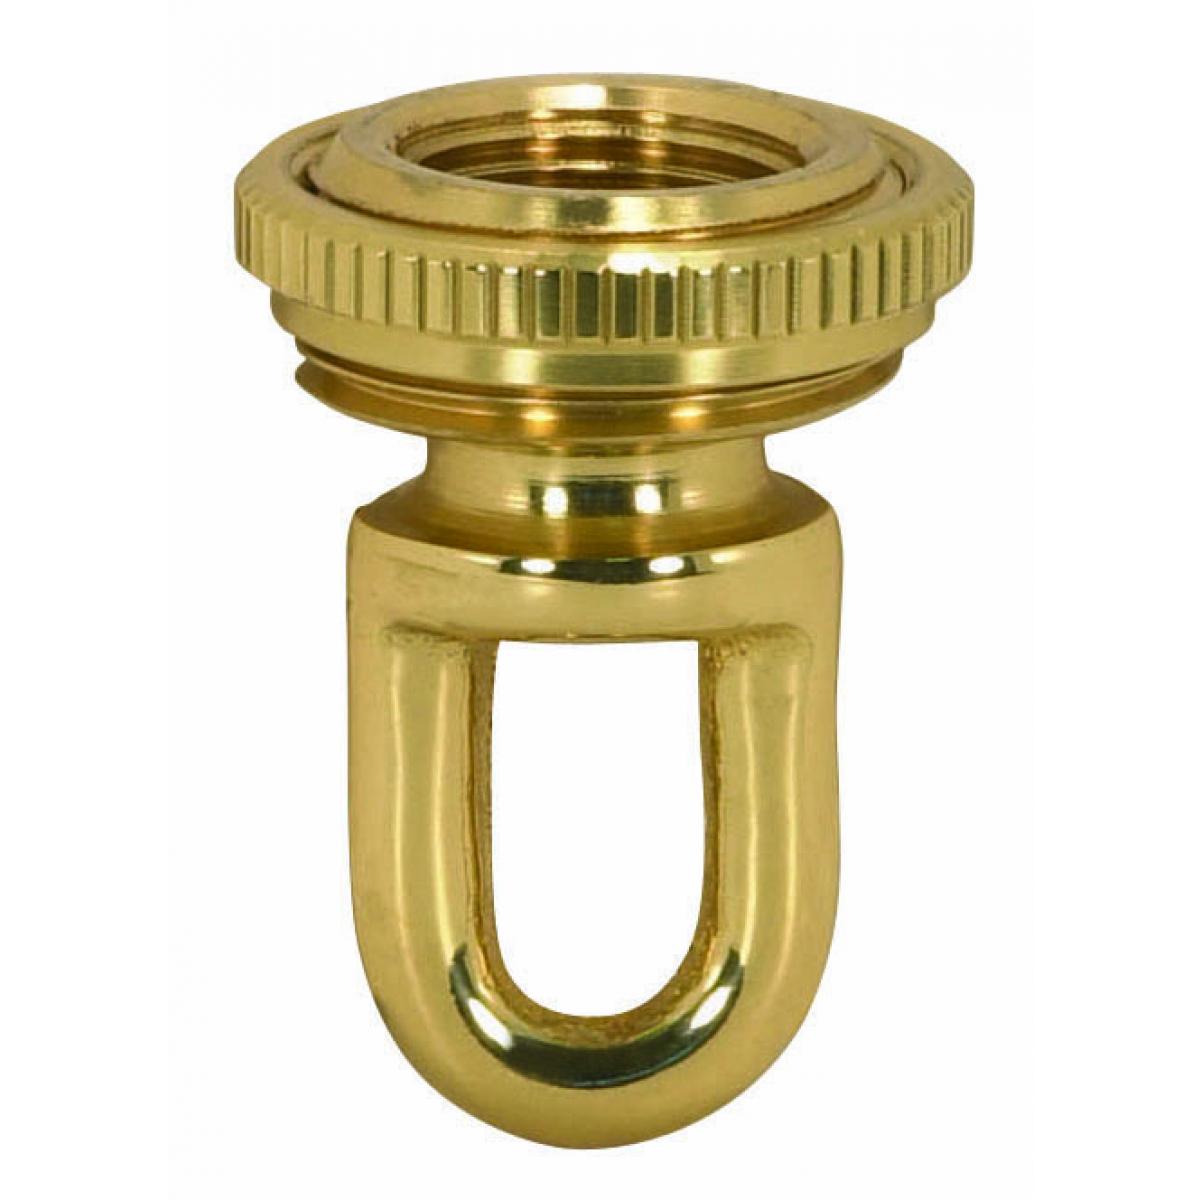 Satco 90-2297 3/8 IP Cast Brass Screw Collar Loop With Ring Fits 1" Canopy Hole 1-1/8" Ring Diameter 1-3/4" Height Polished And Lacquered